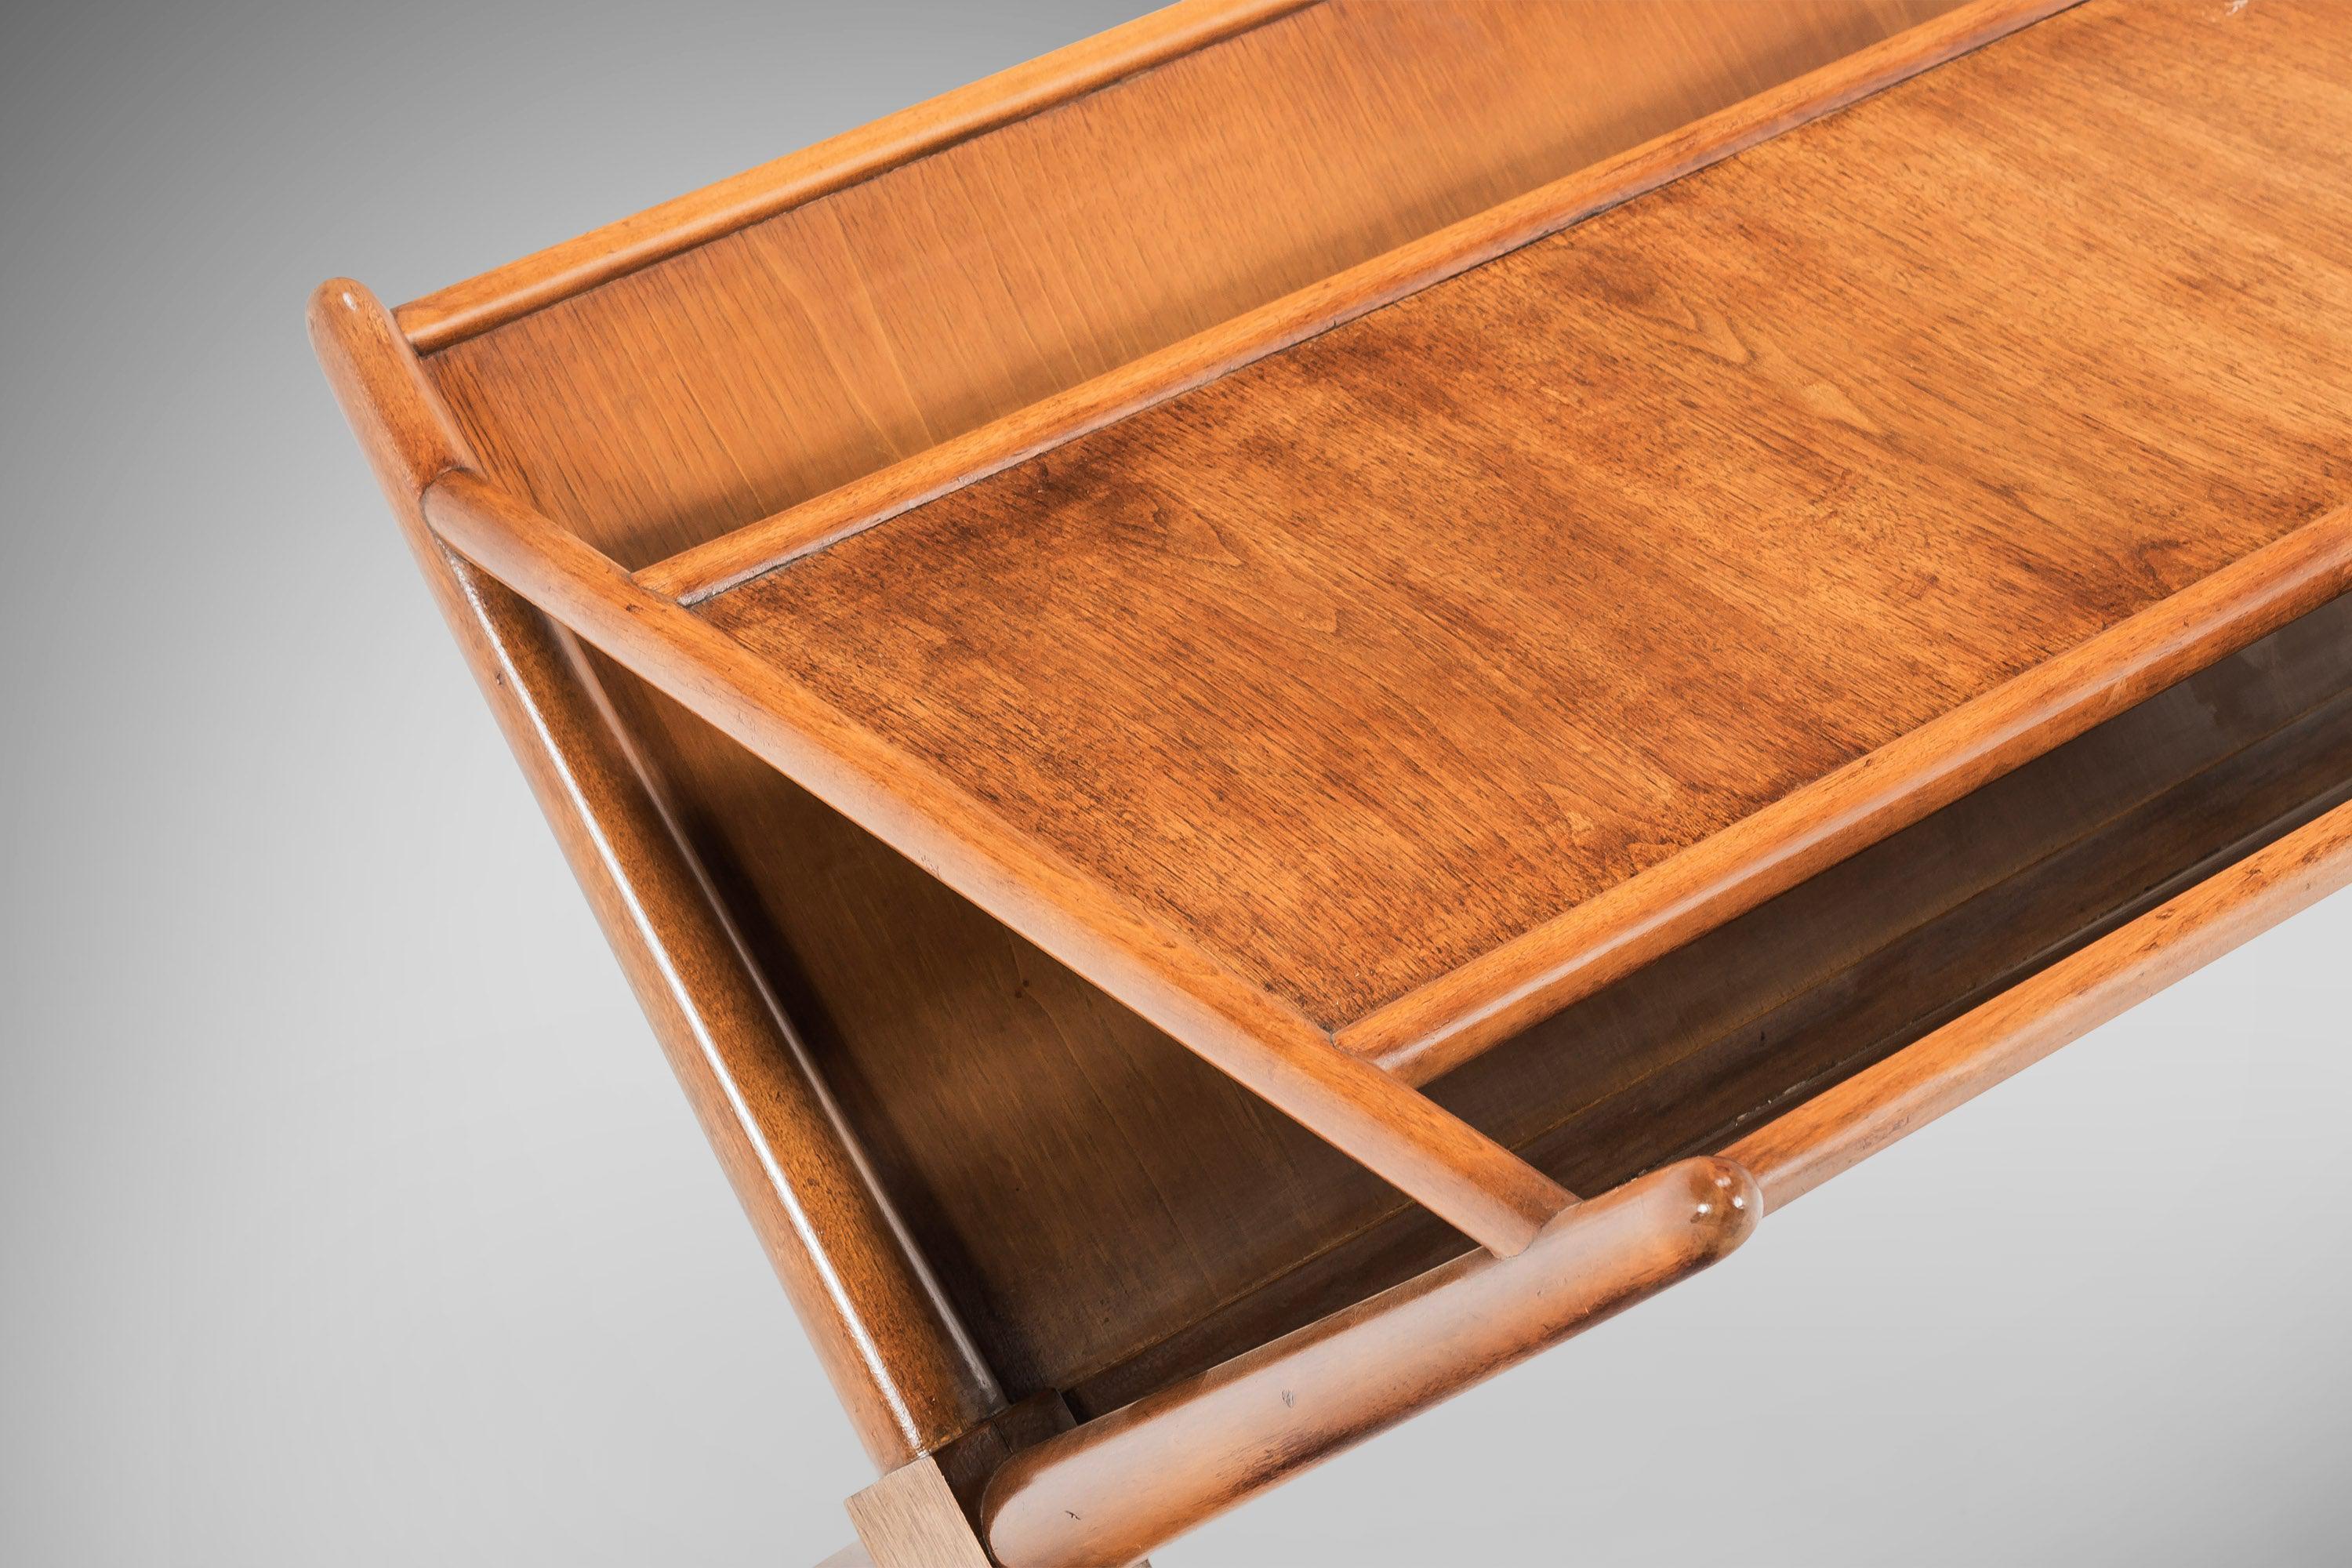 Versatile magazine table designed by T.H. Robbsjohn Gibbings for Widdicomb Furniture. Two angled panels, made of American walnut, allow for magazines and newspapers to be stored on sides with an ample top surface for a lamp. Equal parts functional